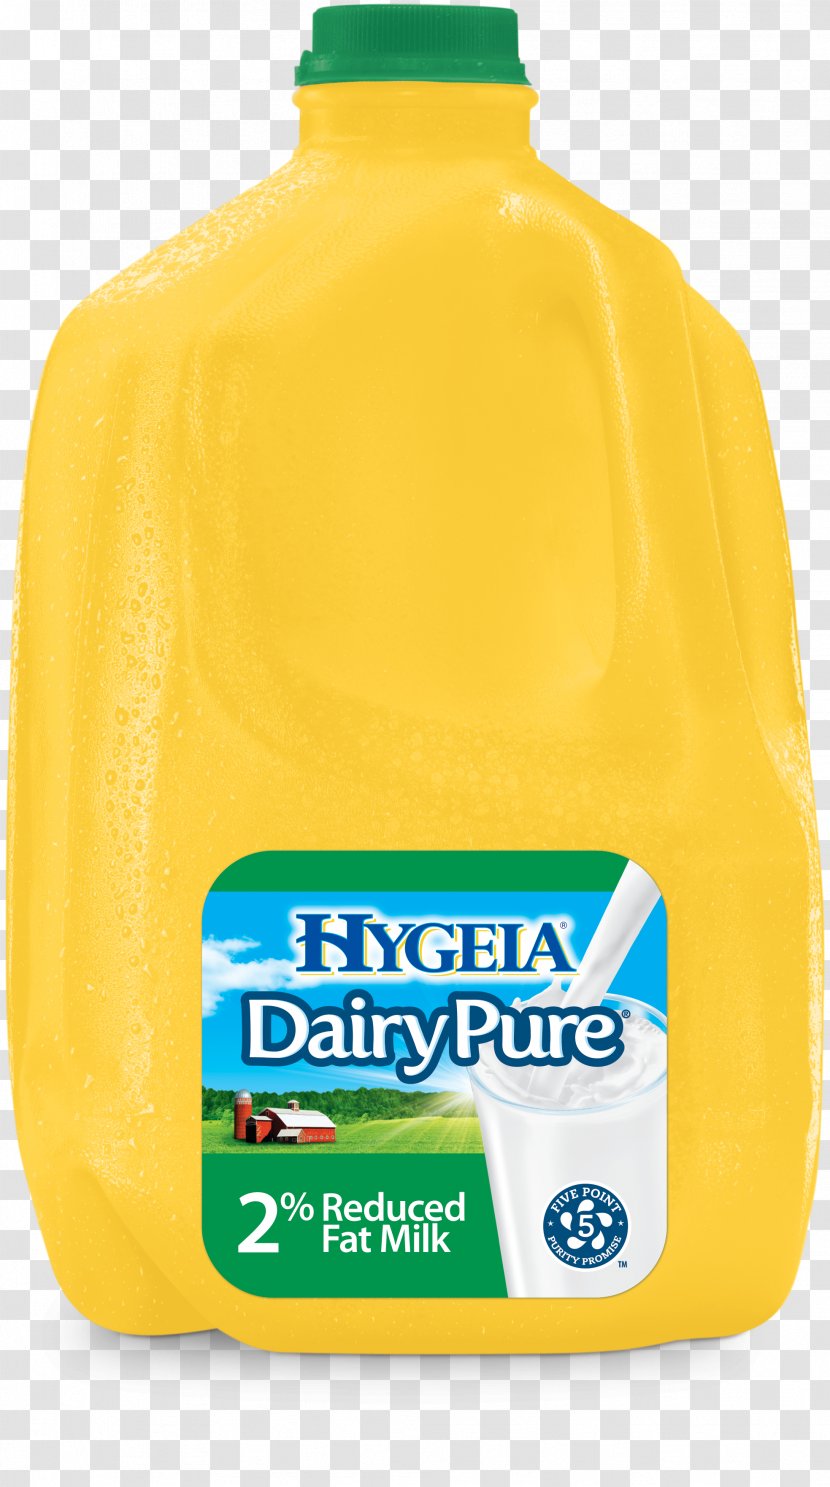 Milk Dairy Products Dean Foods Mayfield Tuscan Farms Transparent PNG